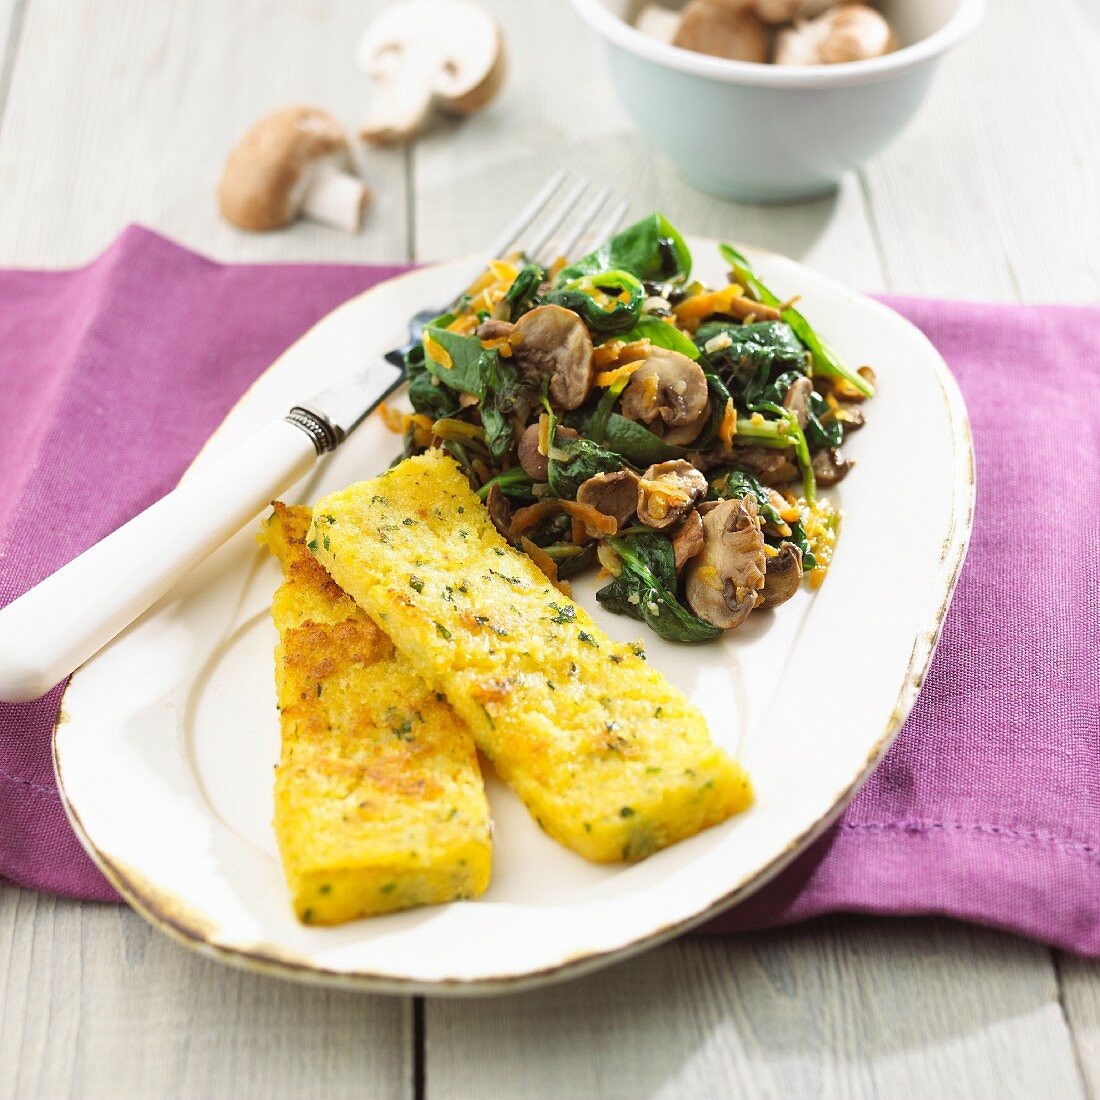 Polenta slices with spinach and mushrooms